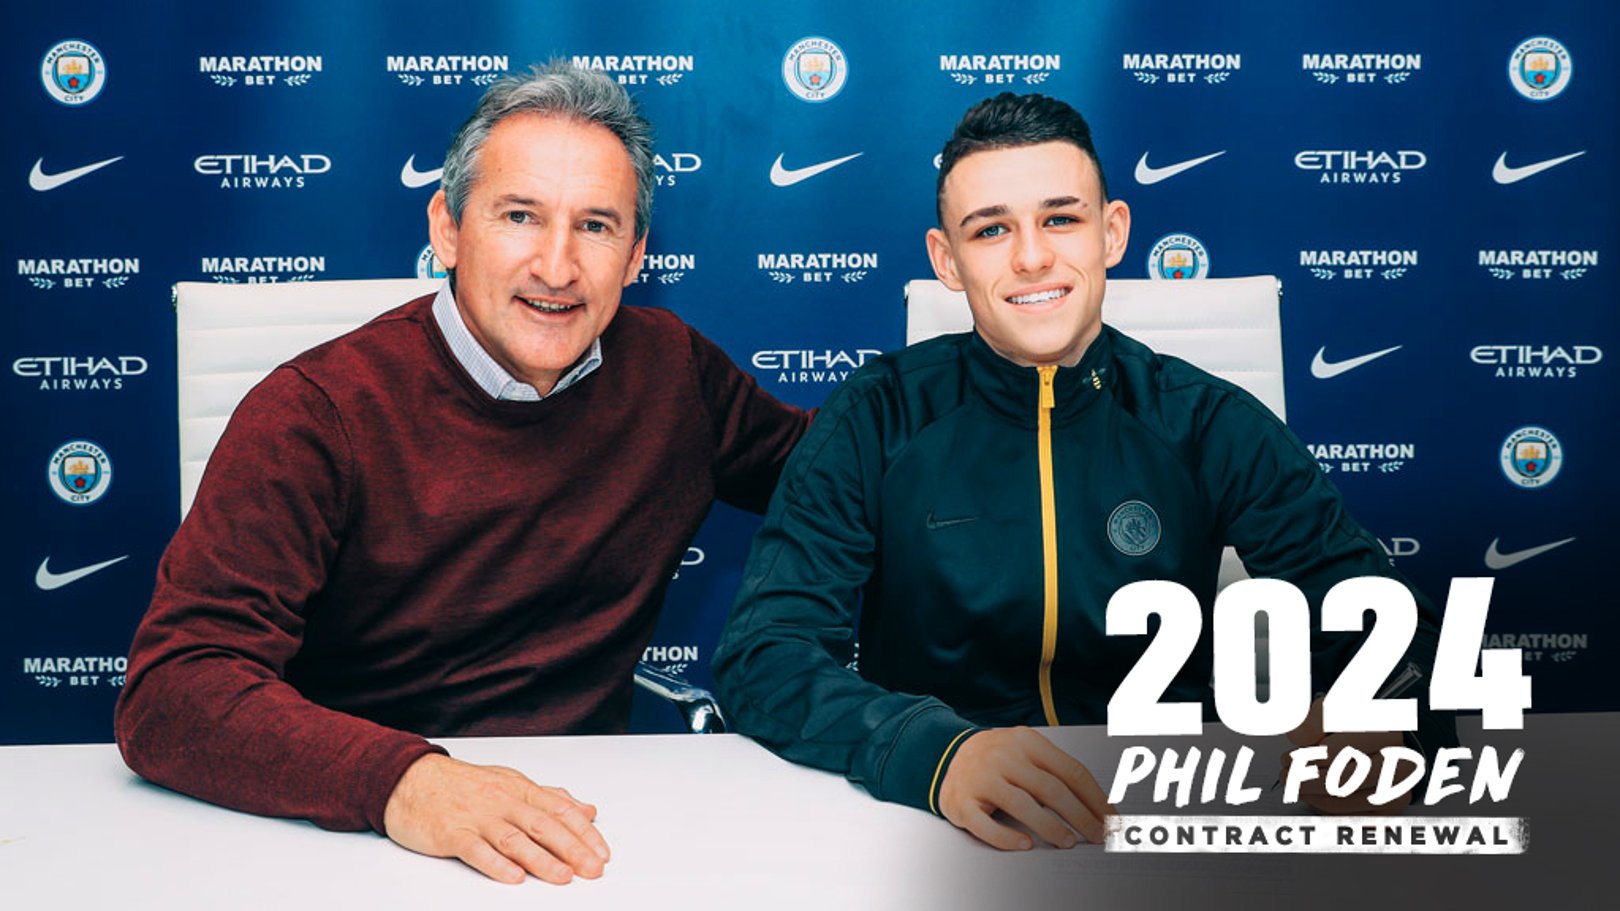 Phil Foden signs contract extension to 2024